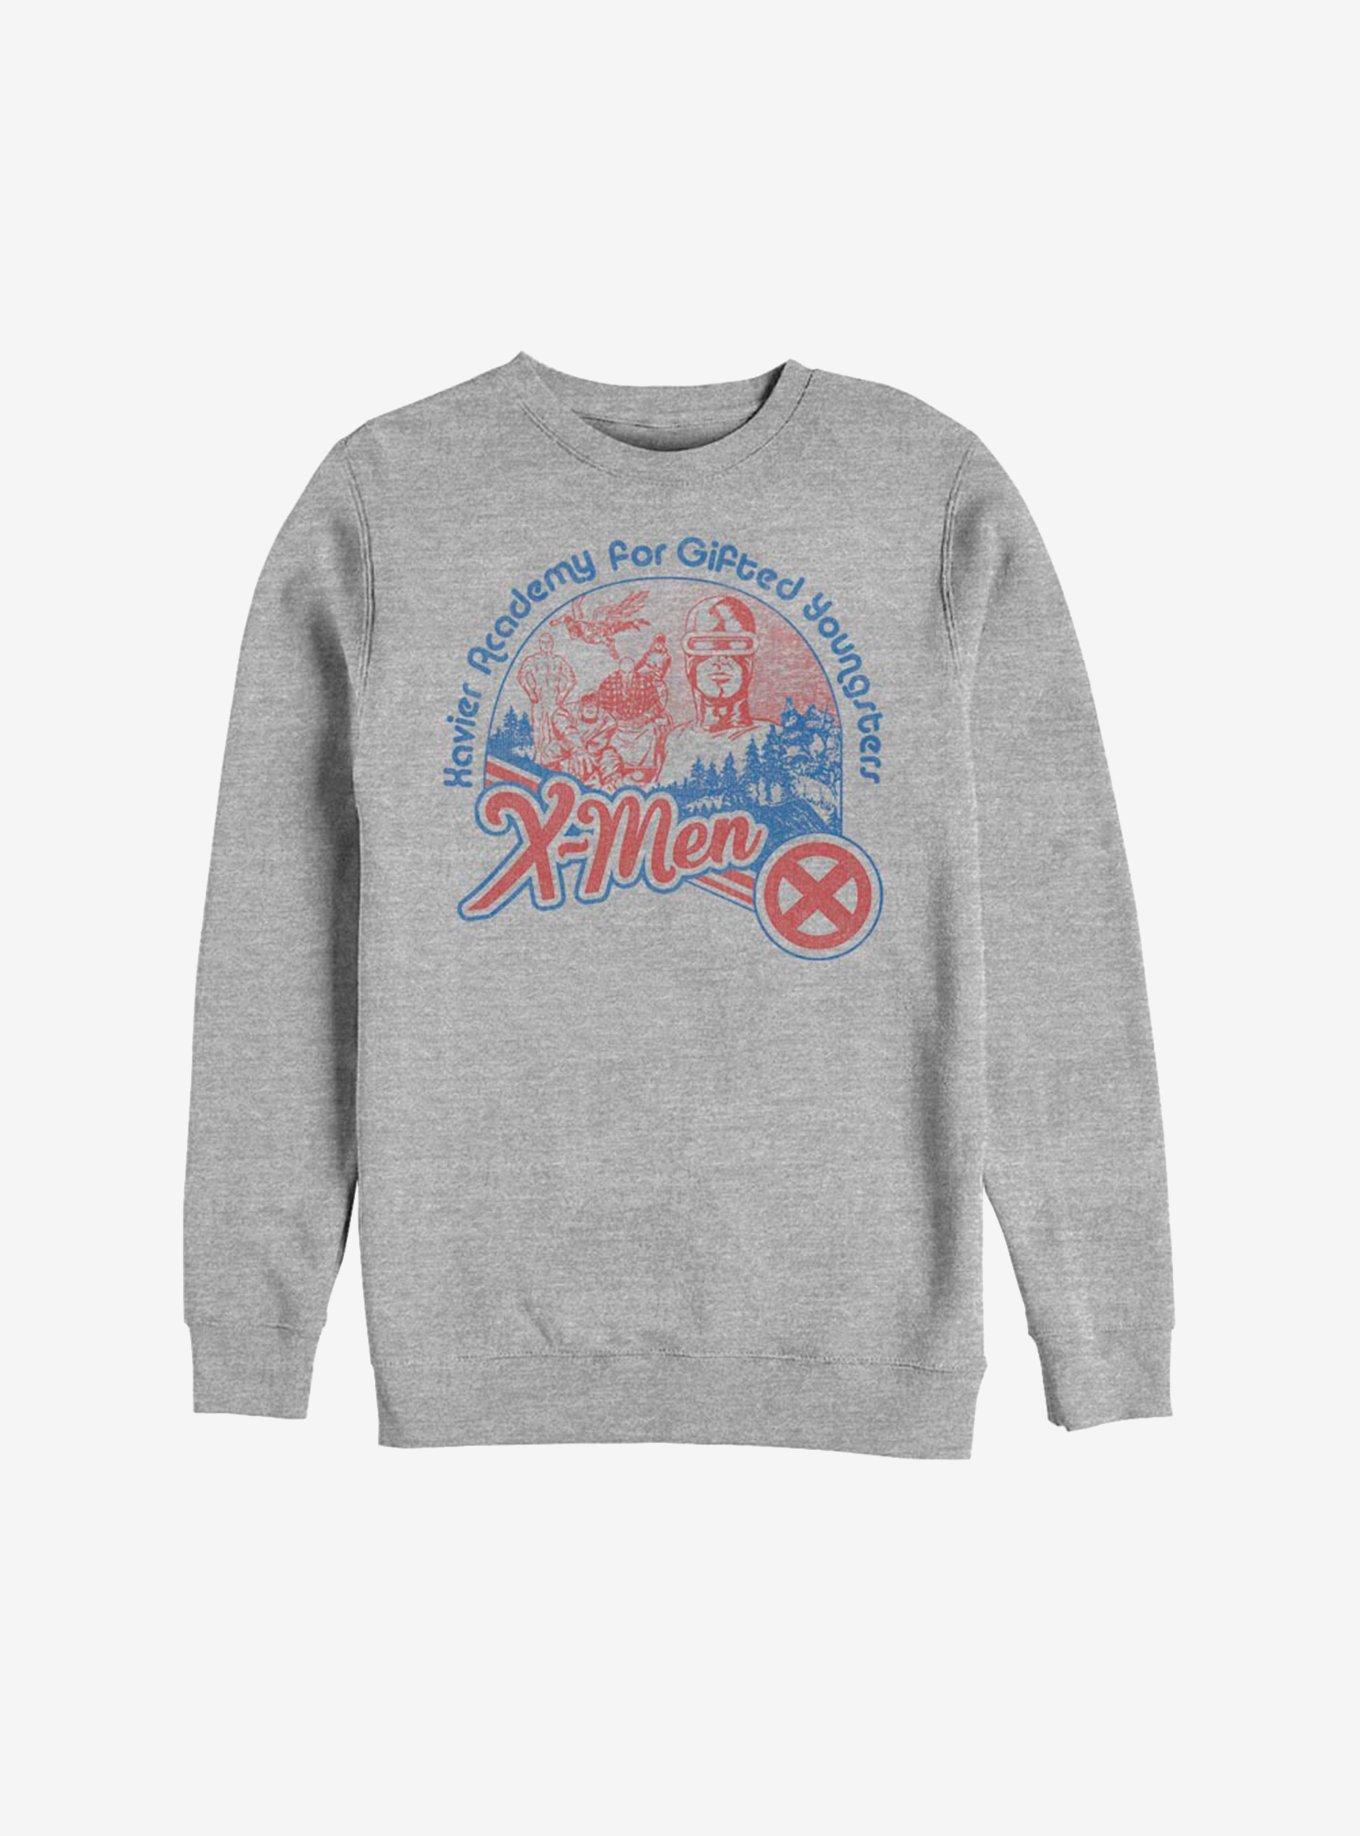 Marvel X-Men Academy For Gifted Youngsters Sweatshirt - GREY | BoxLunch